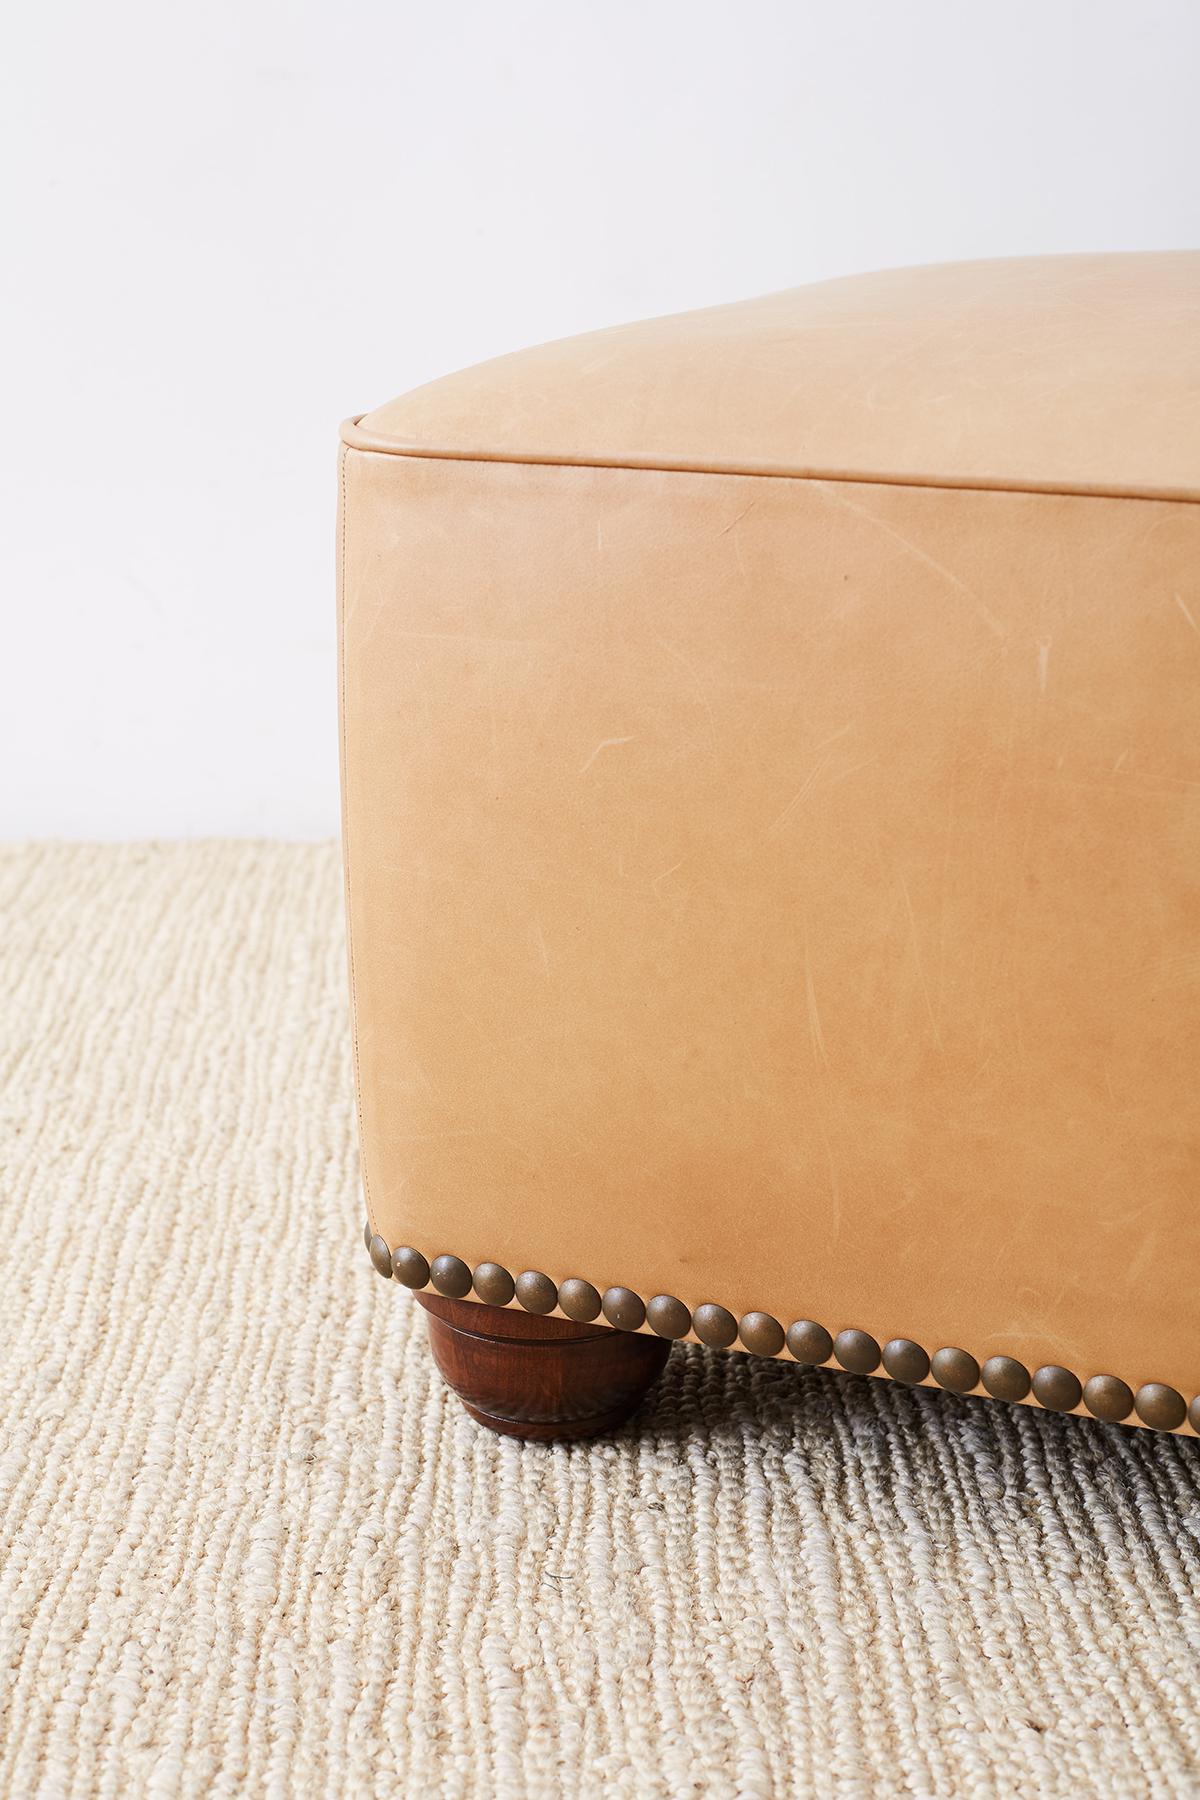 Rustic Contemporary Leather Covered Ottoman or Bench